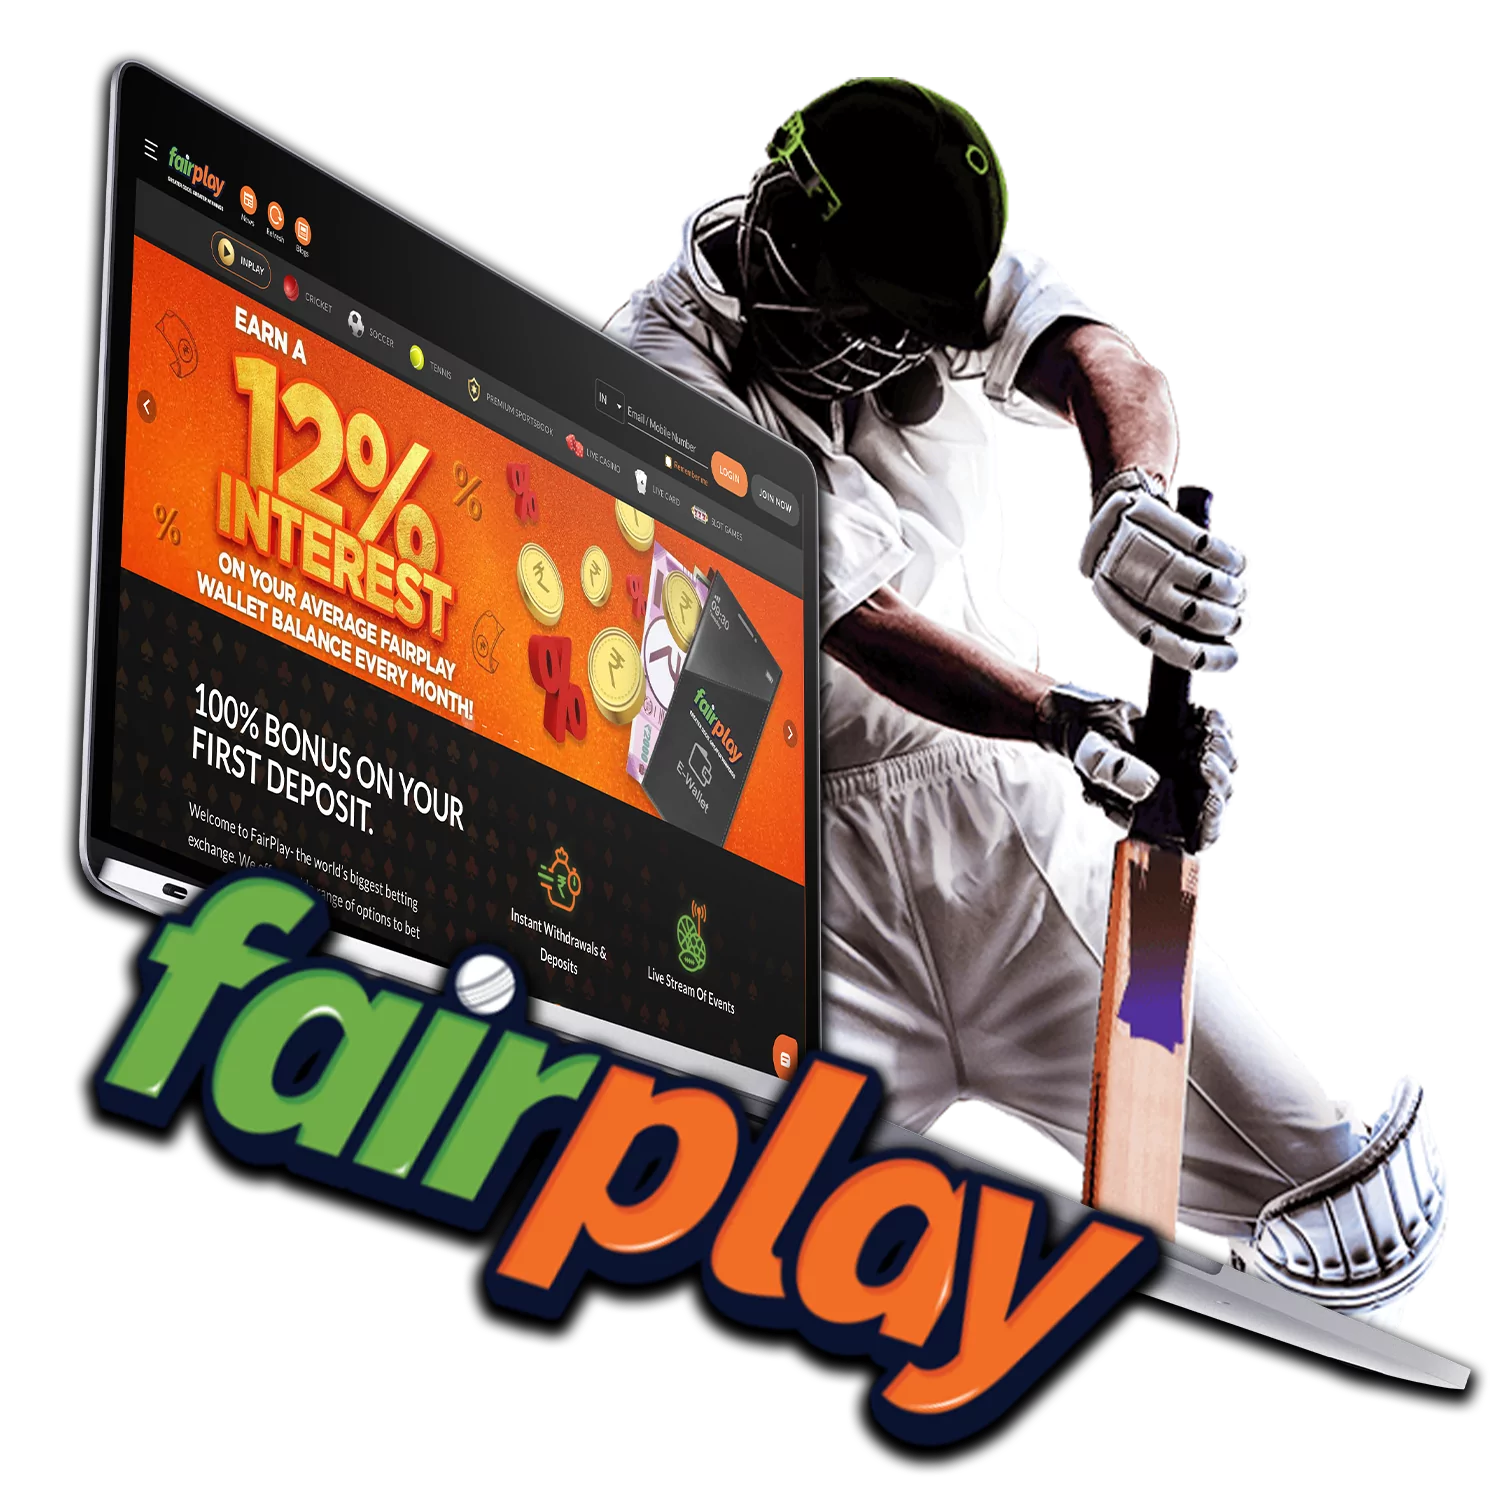 Learn how to get the profit from cricket betting at Fairplay.